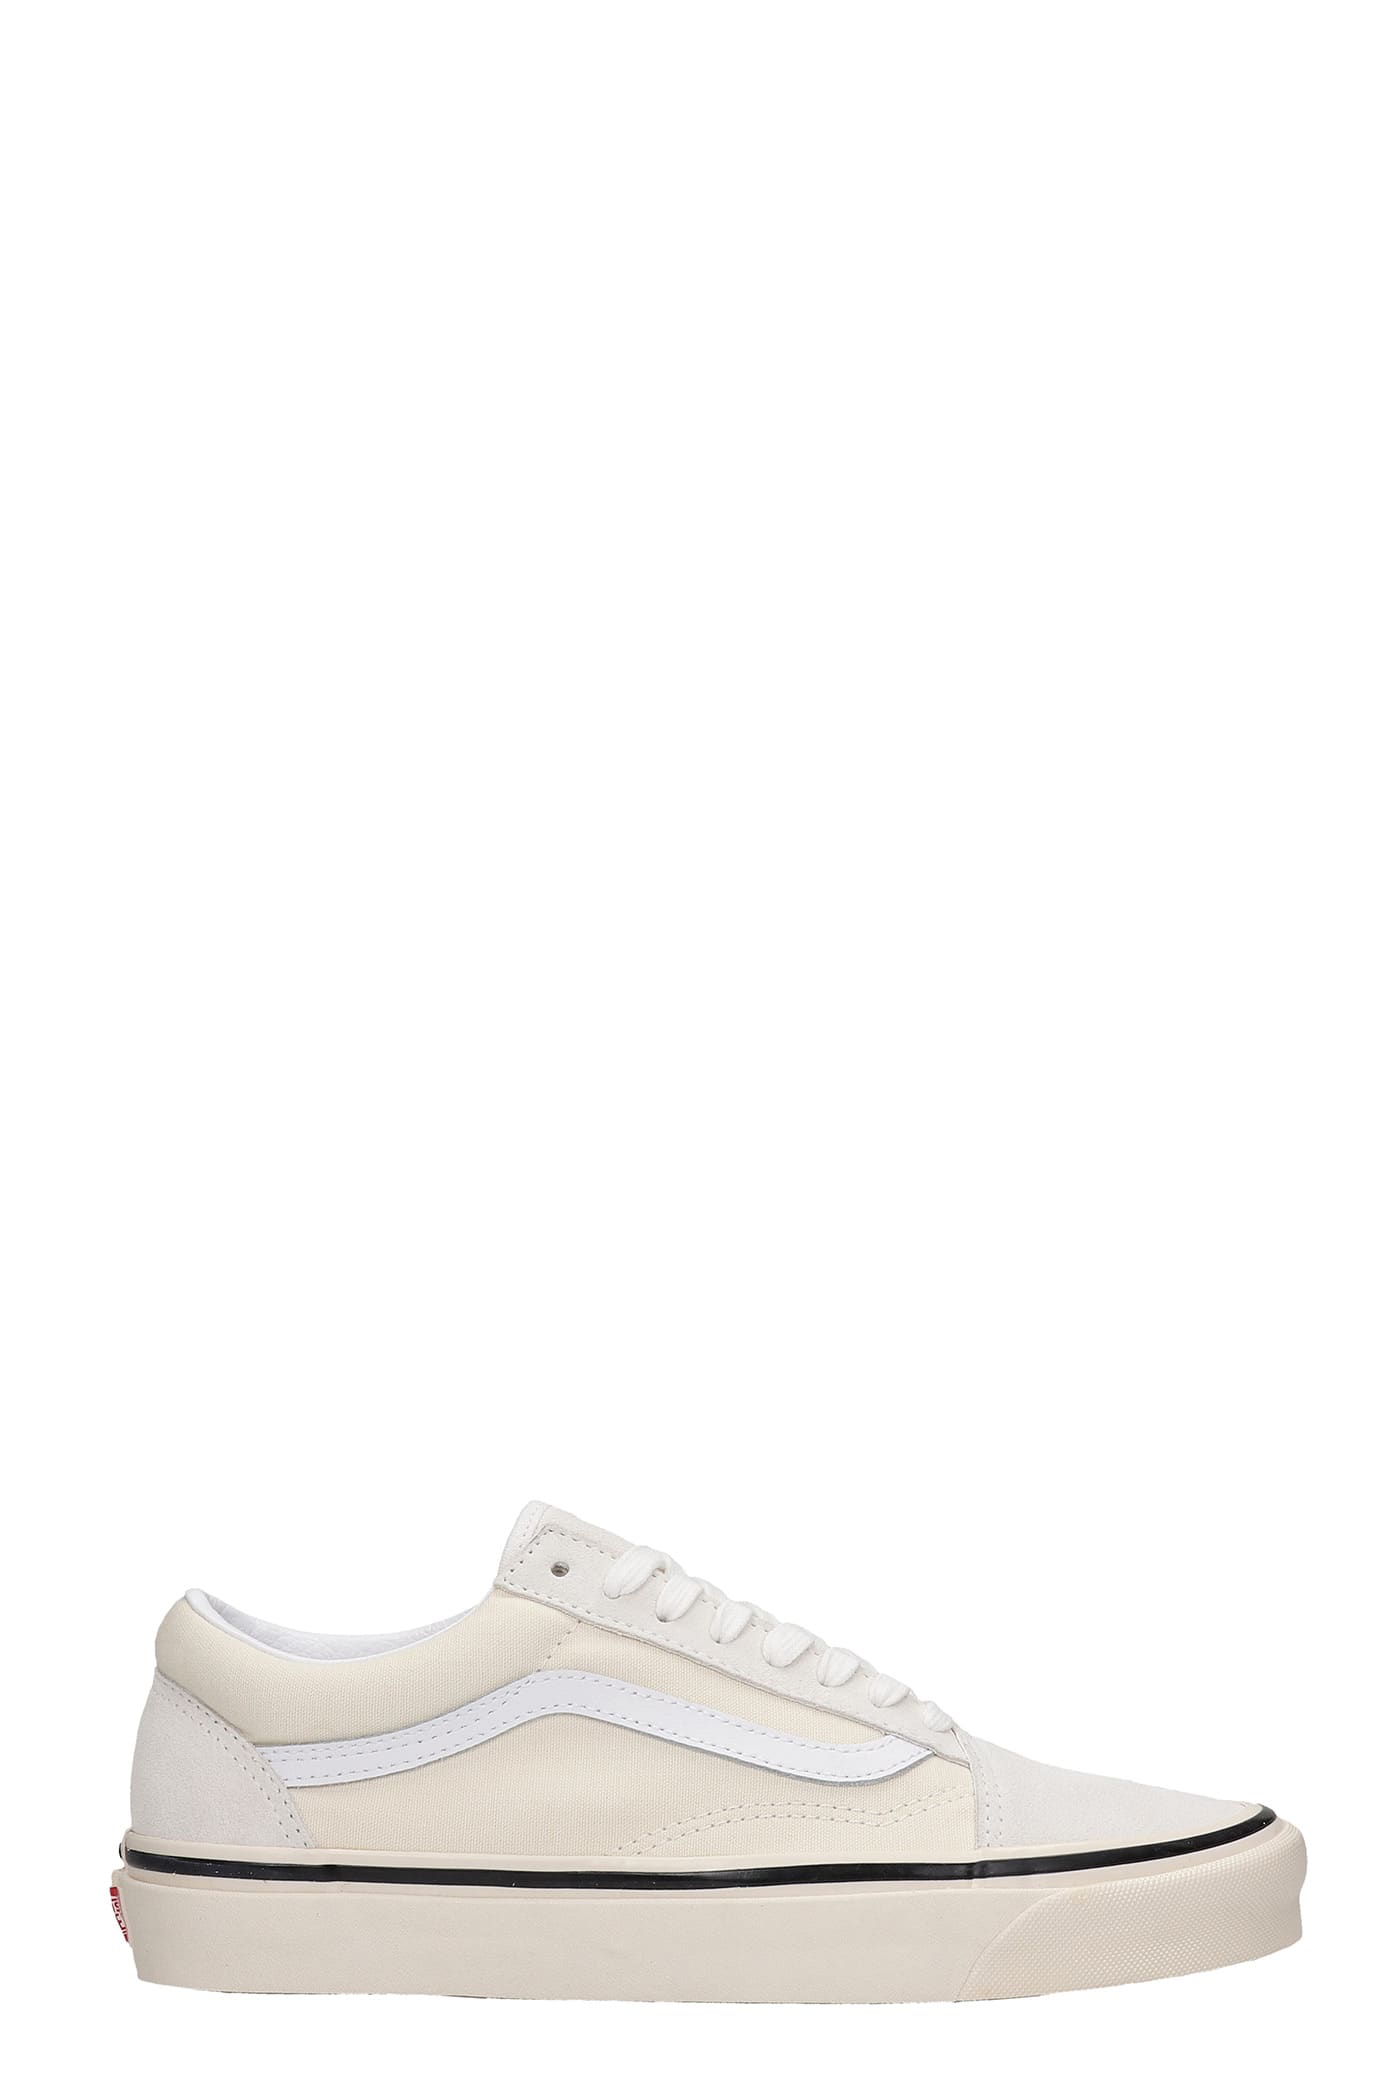 VANS OLD SKOOL 36 trainers IN WHITE CANVAS,VN0A38G2MR41